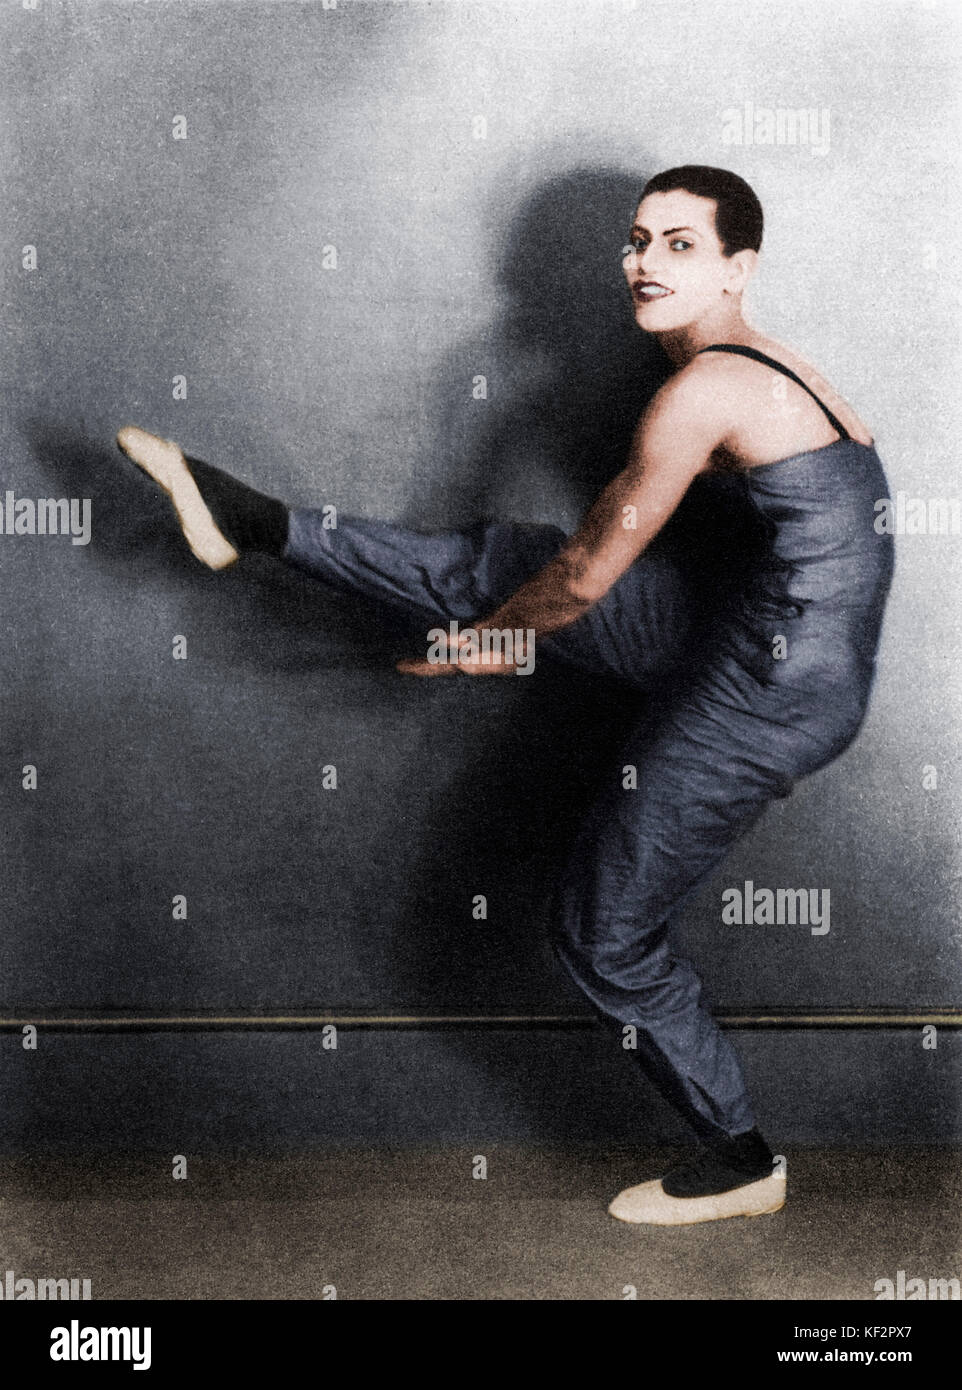 Serge Lifar - in Pastorale, 1926 composed by Georges Auric, choreography by Balanchine. Ukrainian ballet dancer and choreographer, 2 April 1905 -15 December 1986. Colourised version. Stock Photo